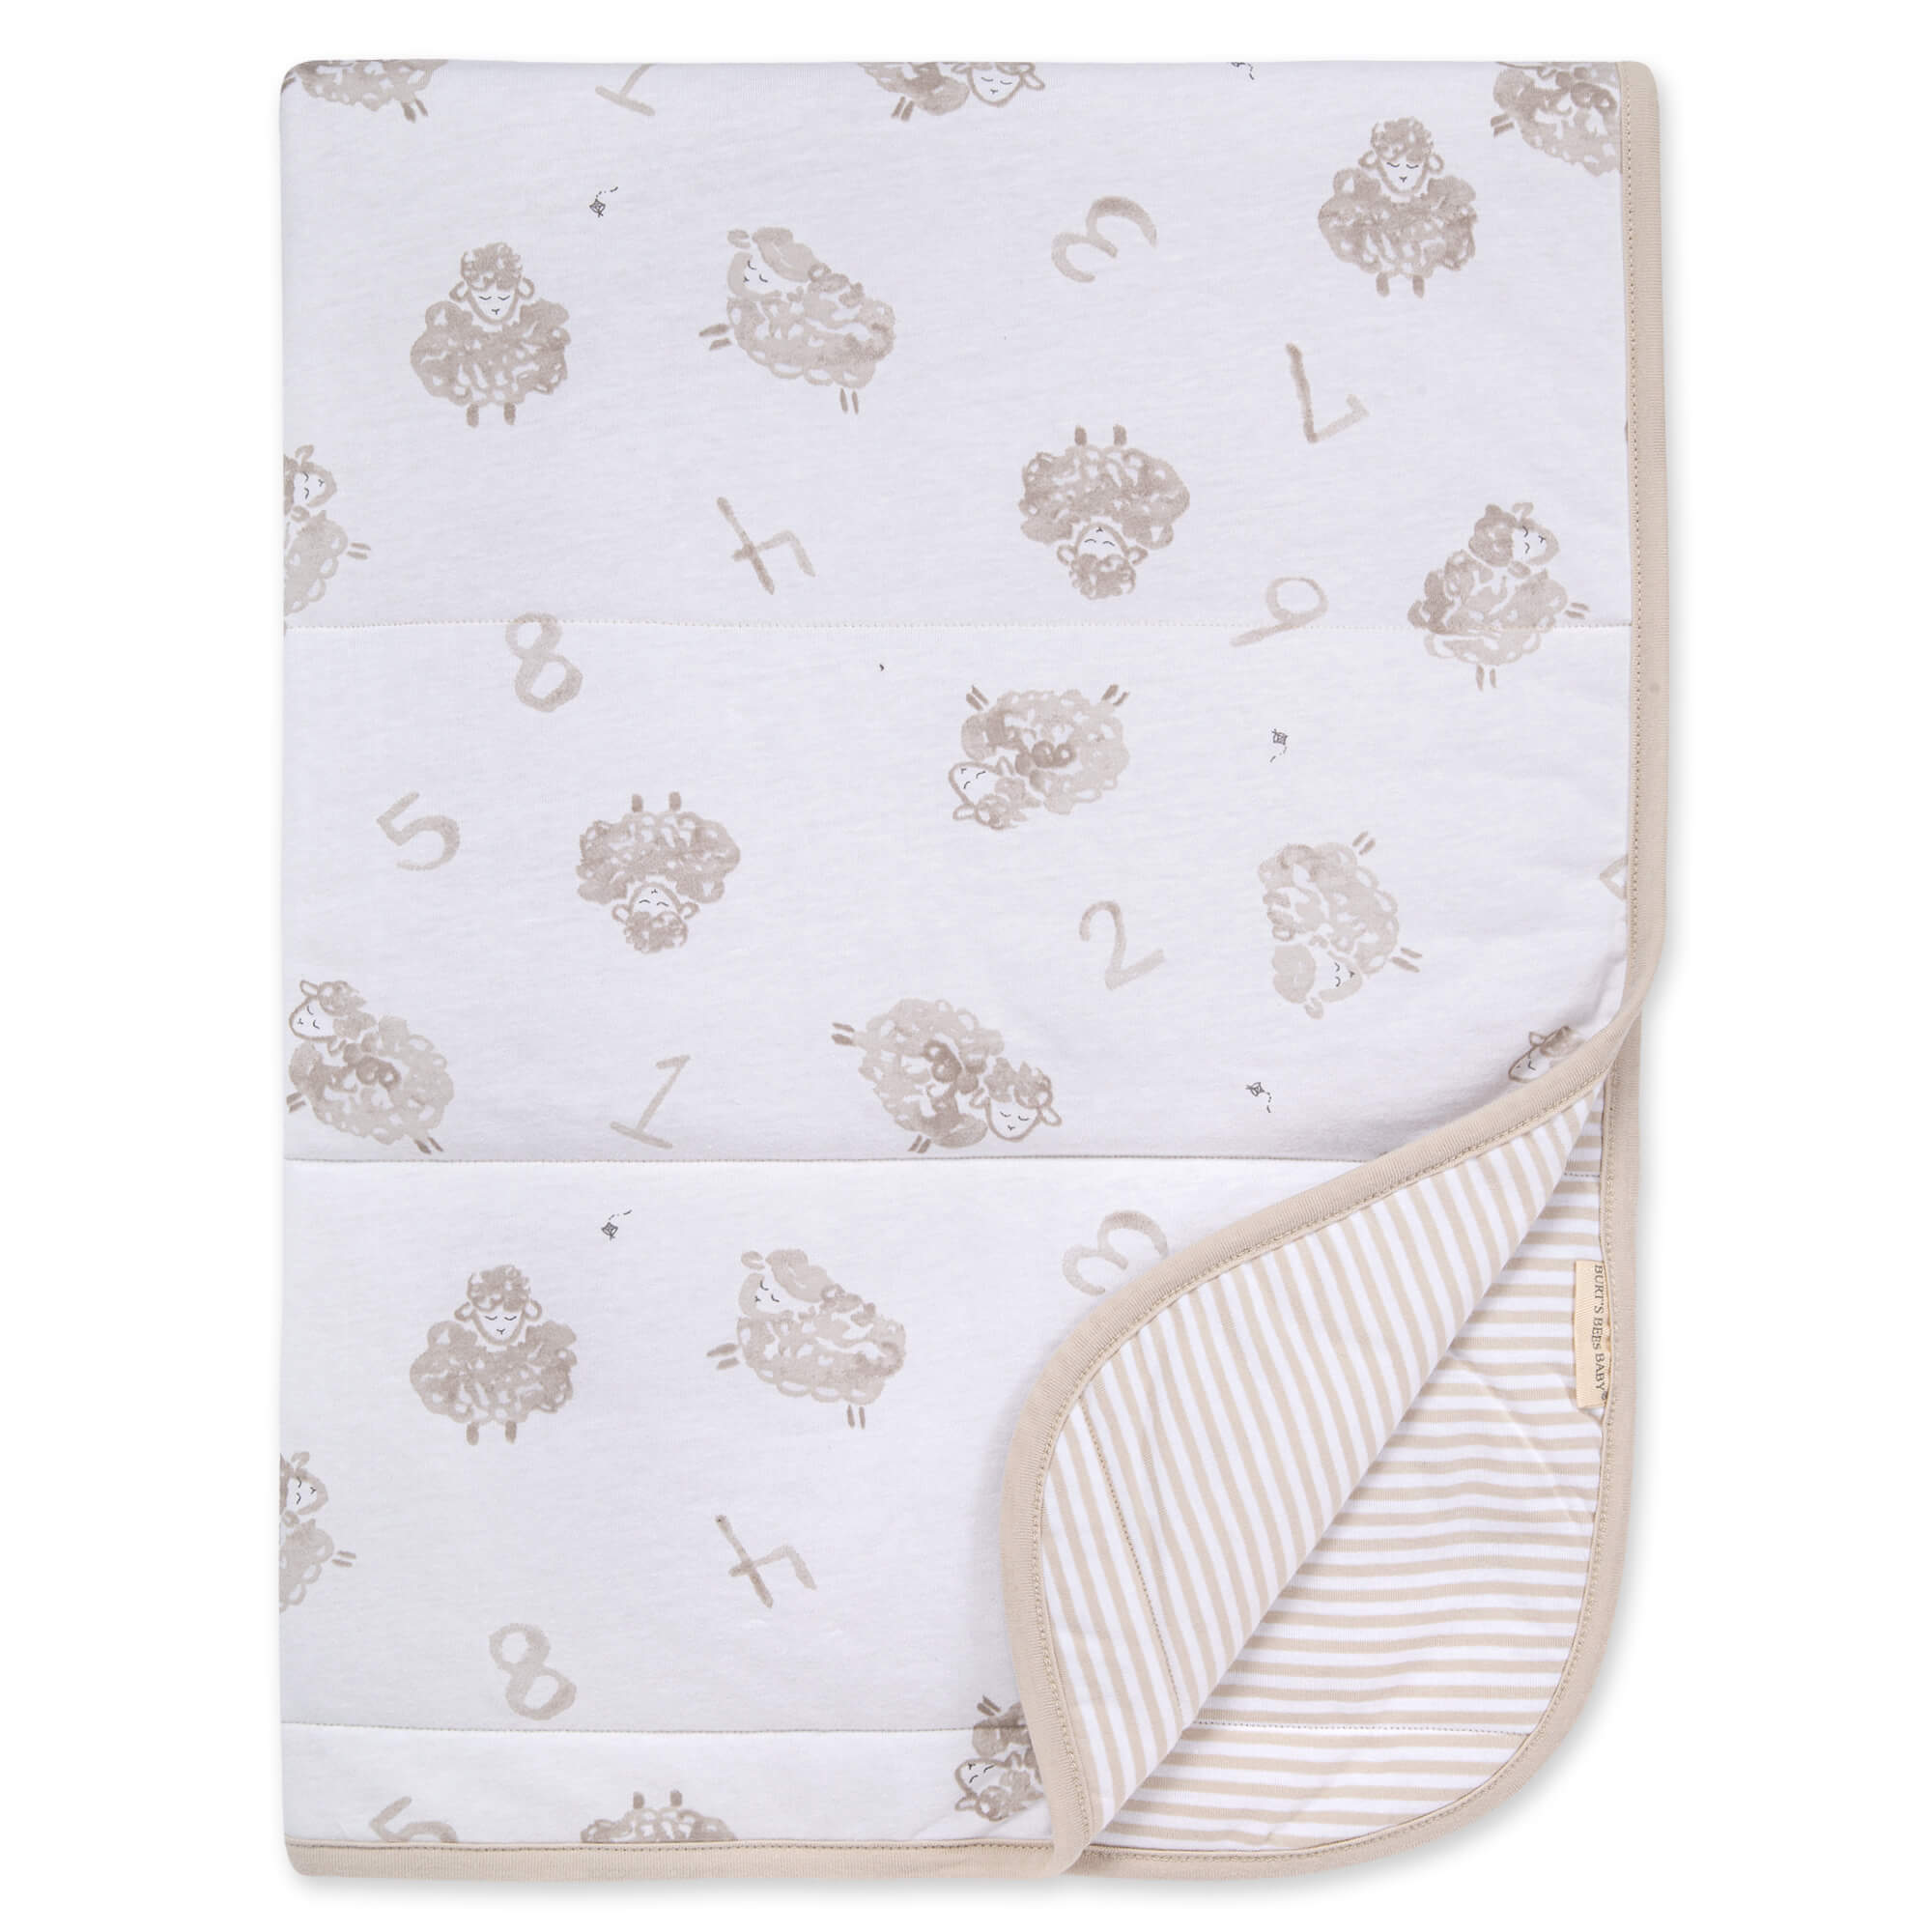 Burt's Bees Baby: 30" x 40" Organic Reversible Baby Blanket (Counting Sheep or Morning Glory) $11.50 + Free Shipping